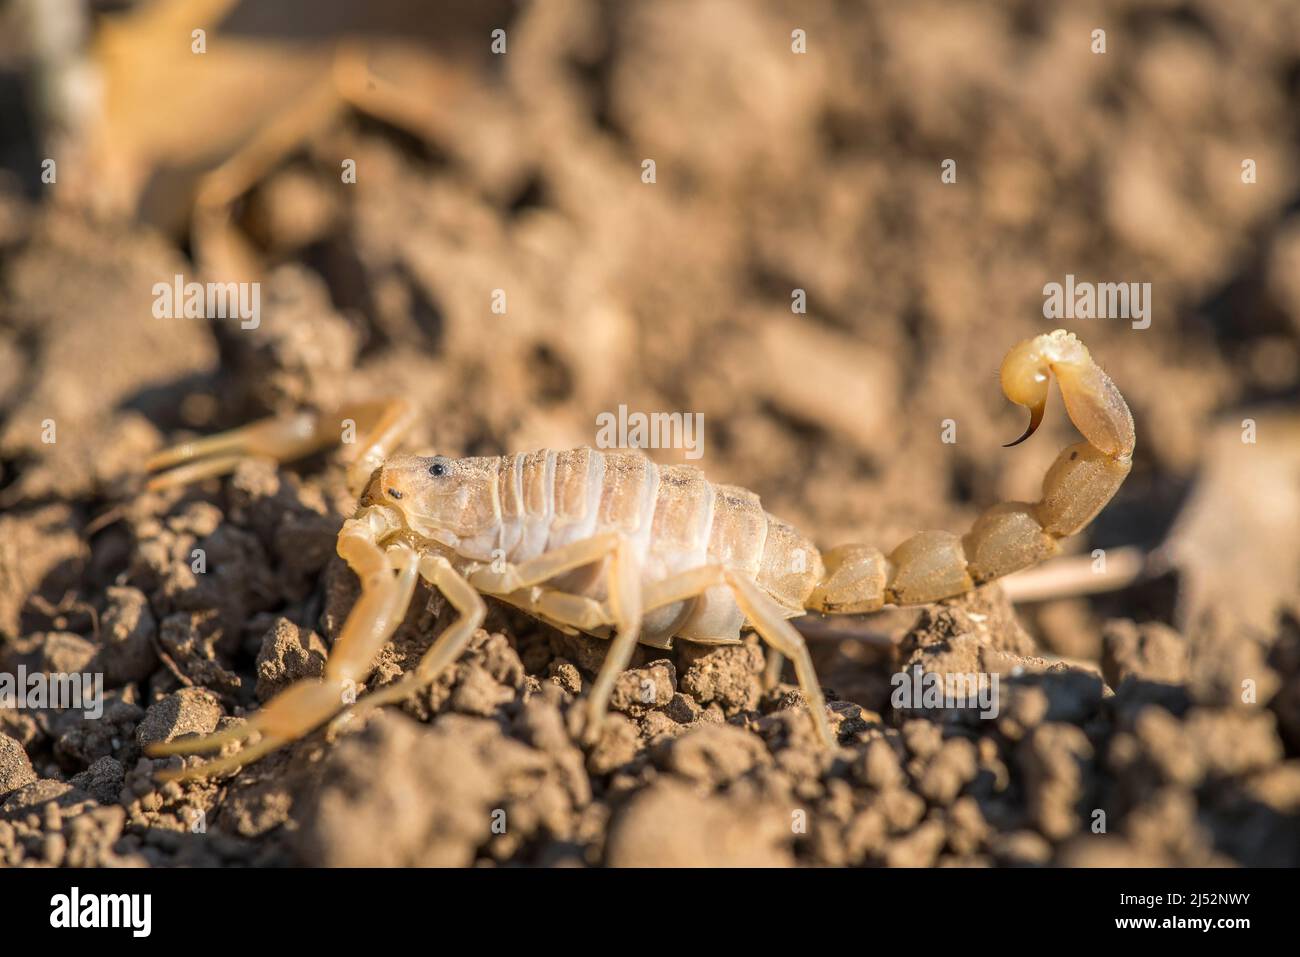 Buthus occitanus, the common yellow scorpion, is a species of scorpion in the family Buthidae. Stock Photo